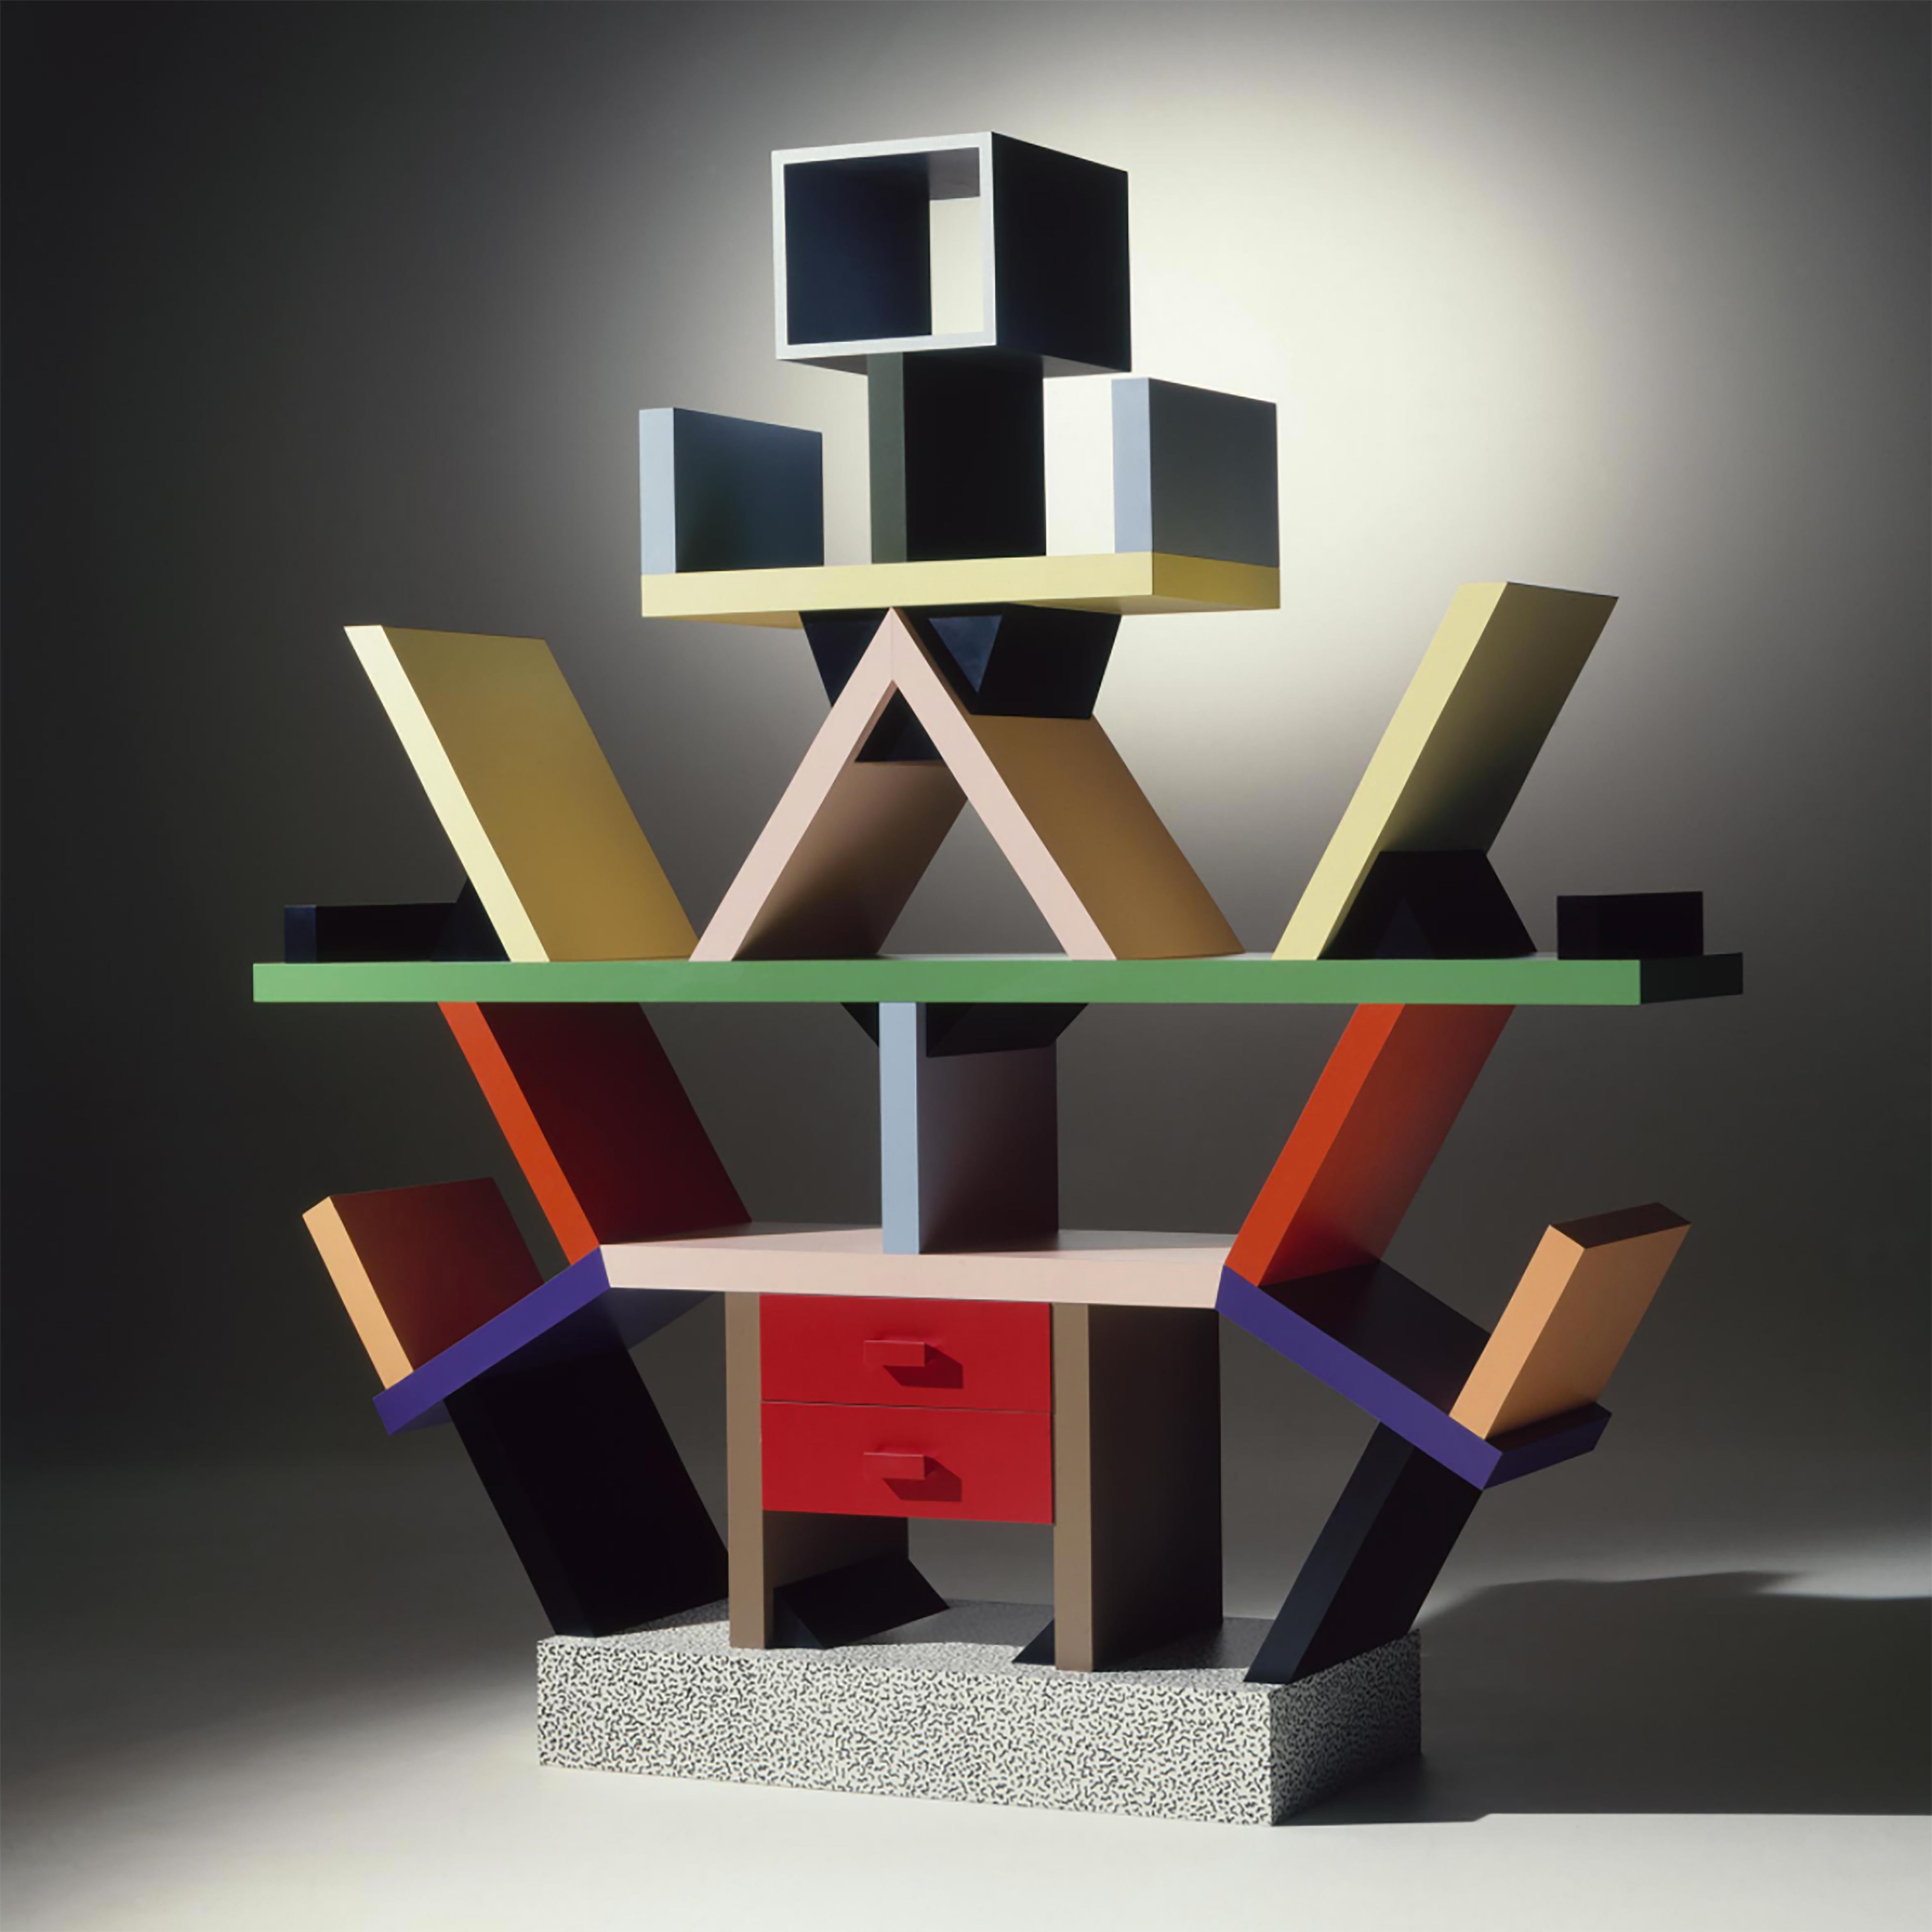 Ettore Sottsass Carlton Shelf, 1981, by Memphis Italy, room divider in very good condition.
Iconic piece of contemporary Italian design, signed and numbered (name plate on the base).
“Certificate of Authenticity” provided with this masterpiece of